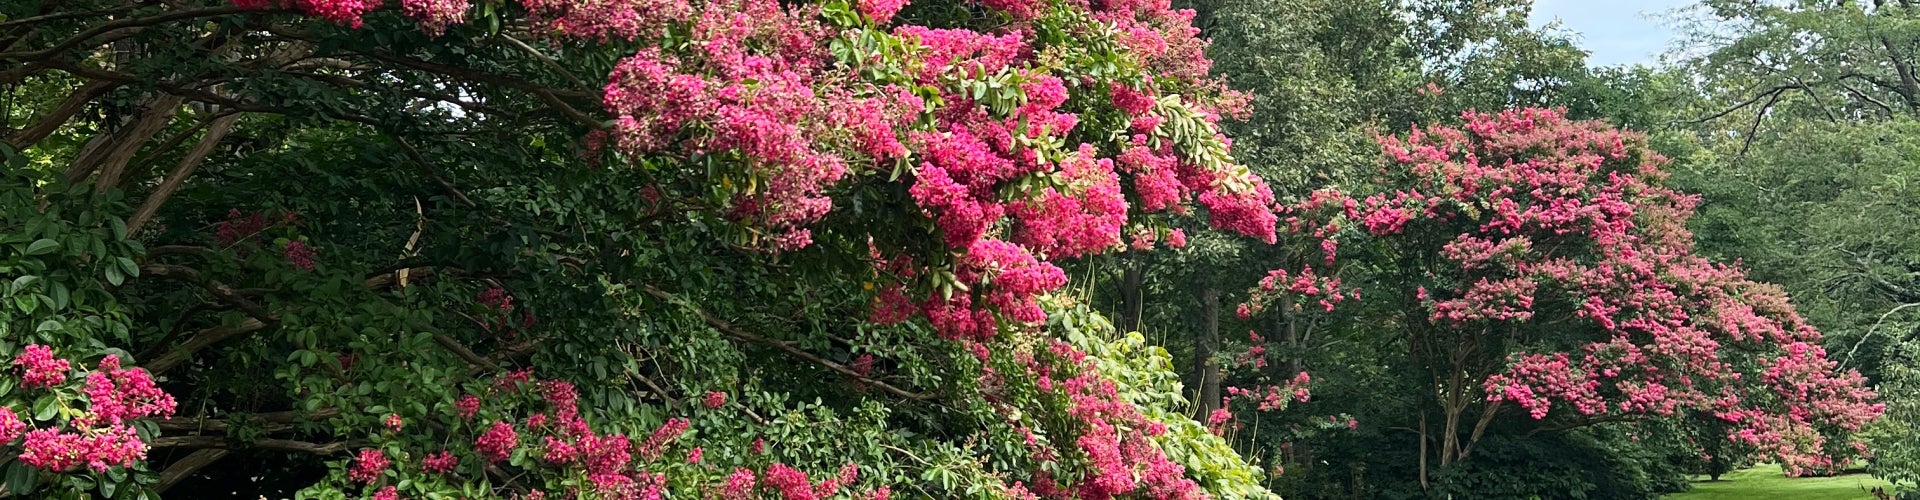 Crapemyrtle trees in bloom with magenta flowers and green foliage. 